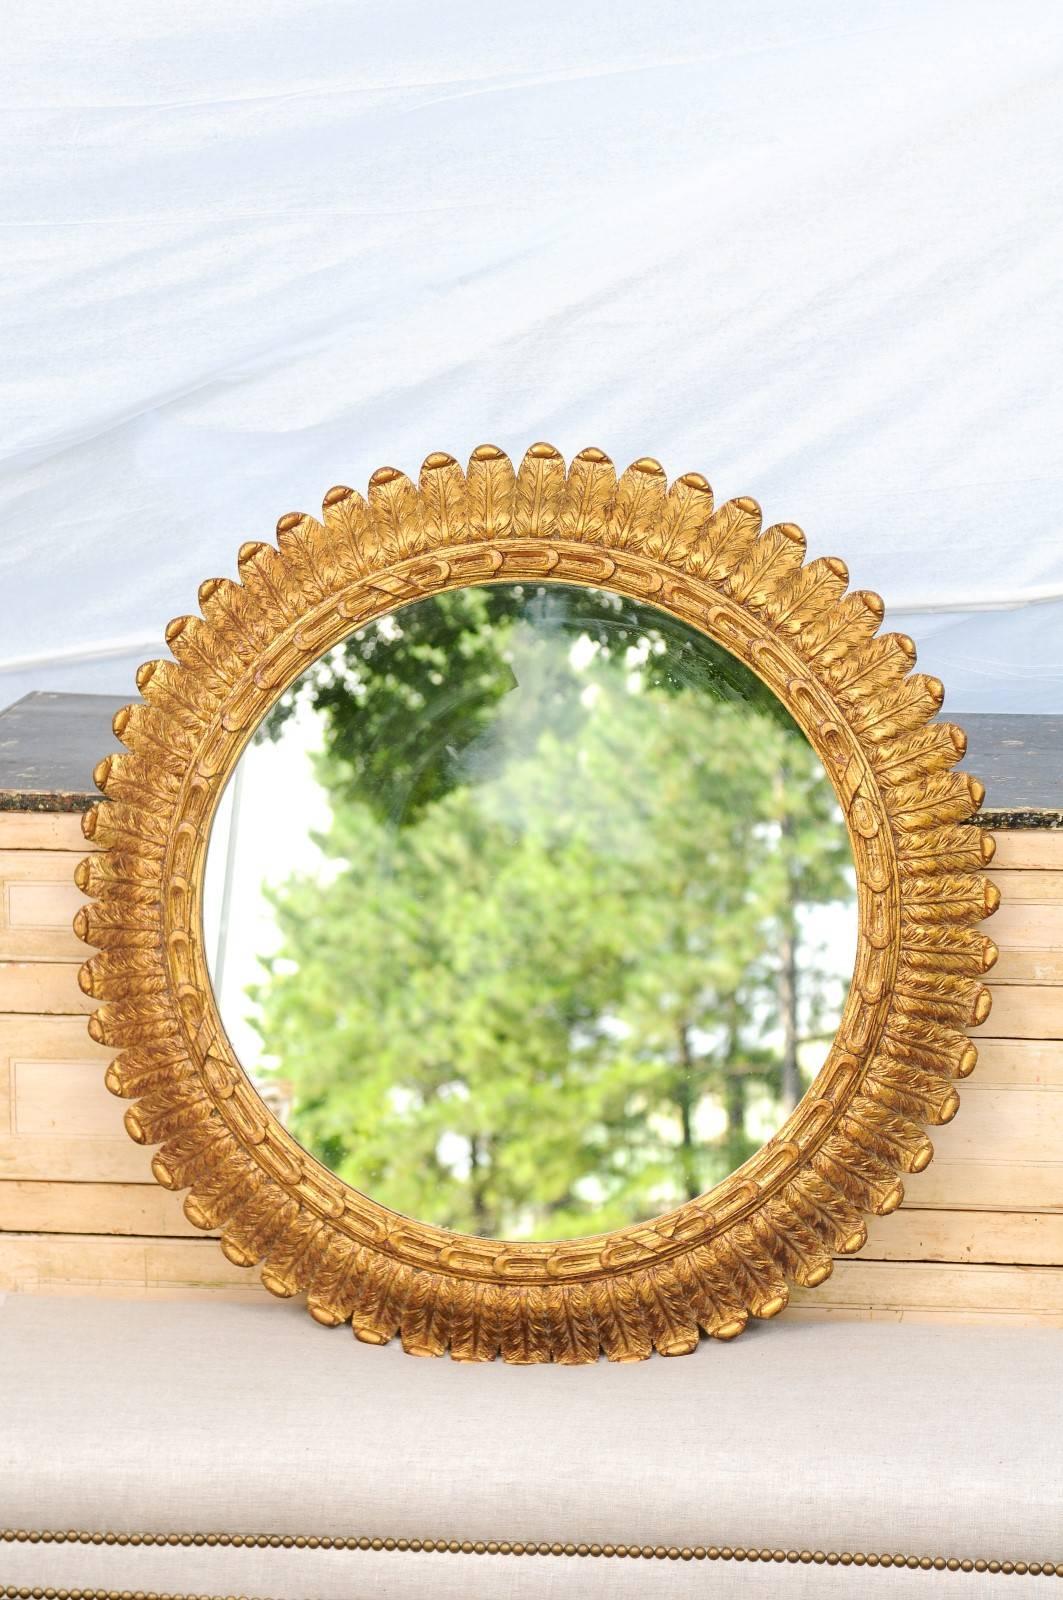 This French giltwood circular mirror from the mid-20th century features a clear central mirror providing great reflection, surrounded by a carved foliage themed frame. The inner molding, closer to the glass, is adorned with oblong carved motifs